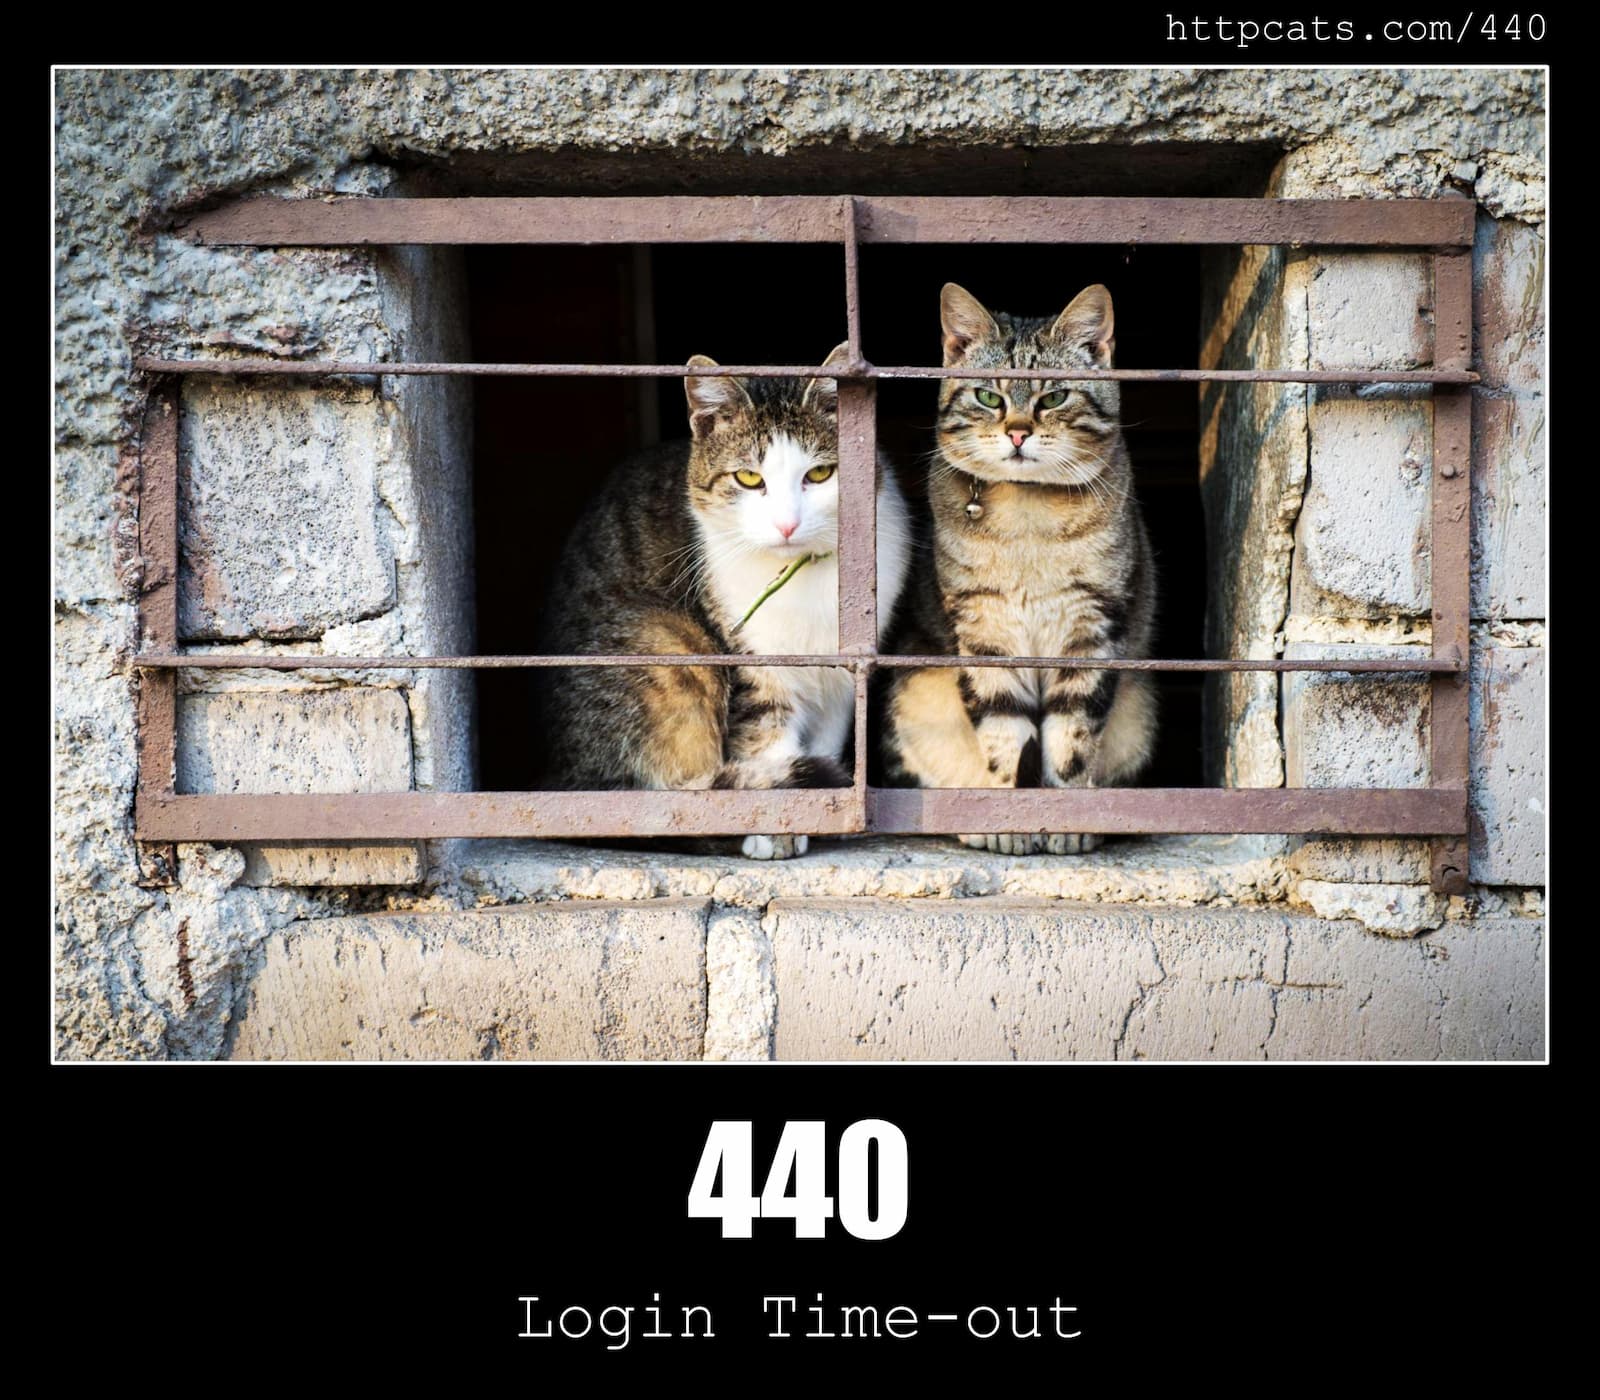 HTTP Status Code 440 Login Time-out & Cats